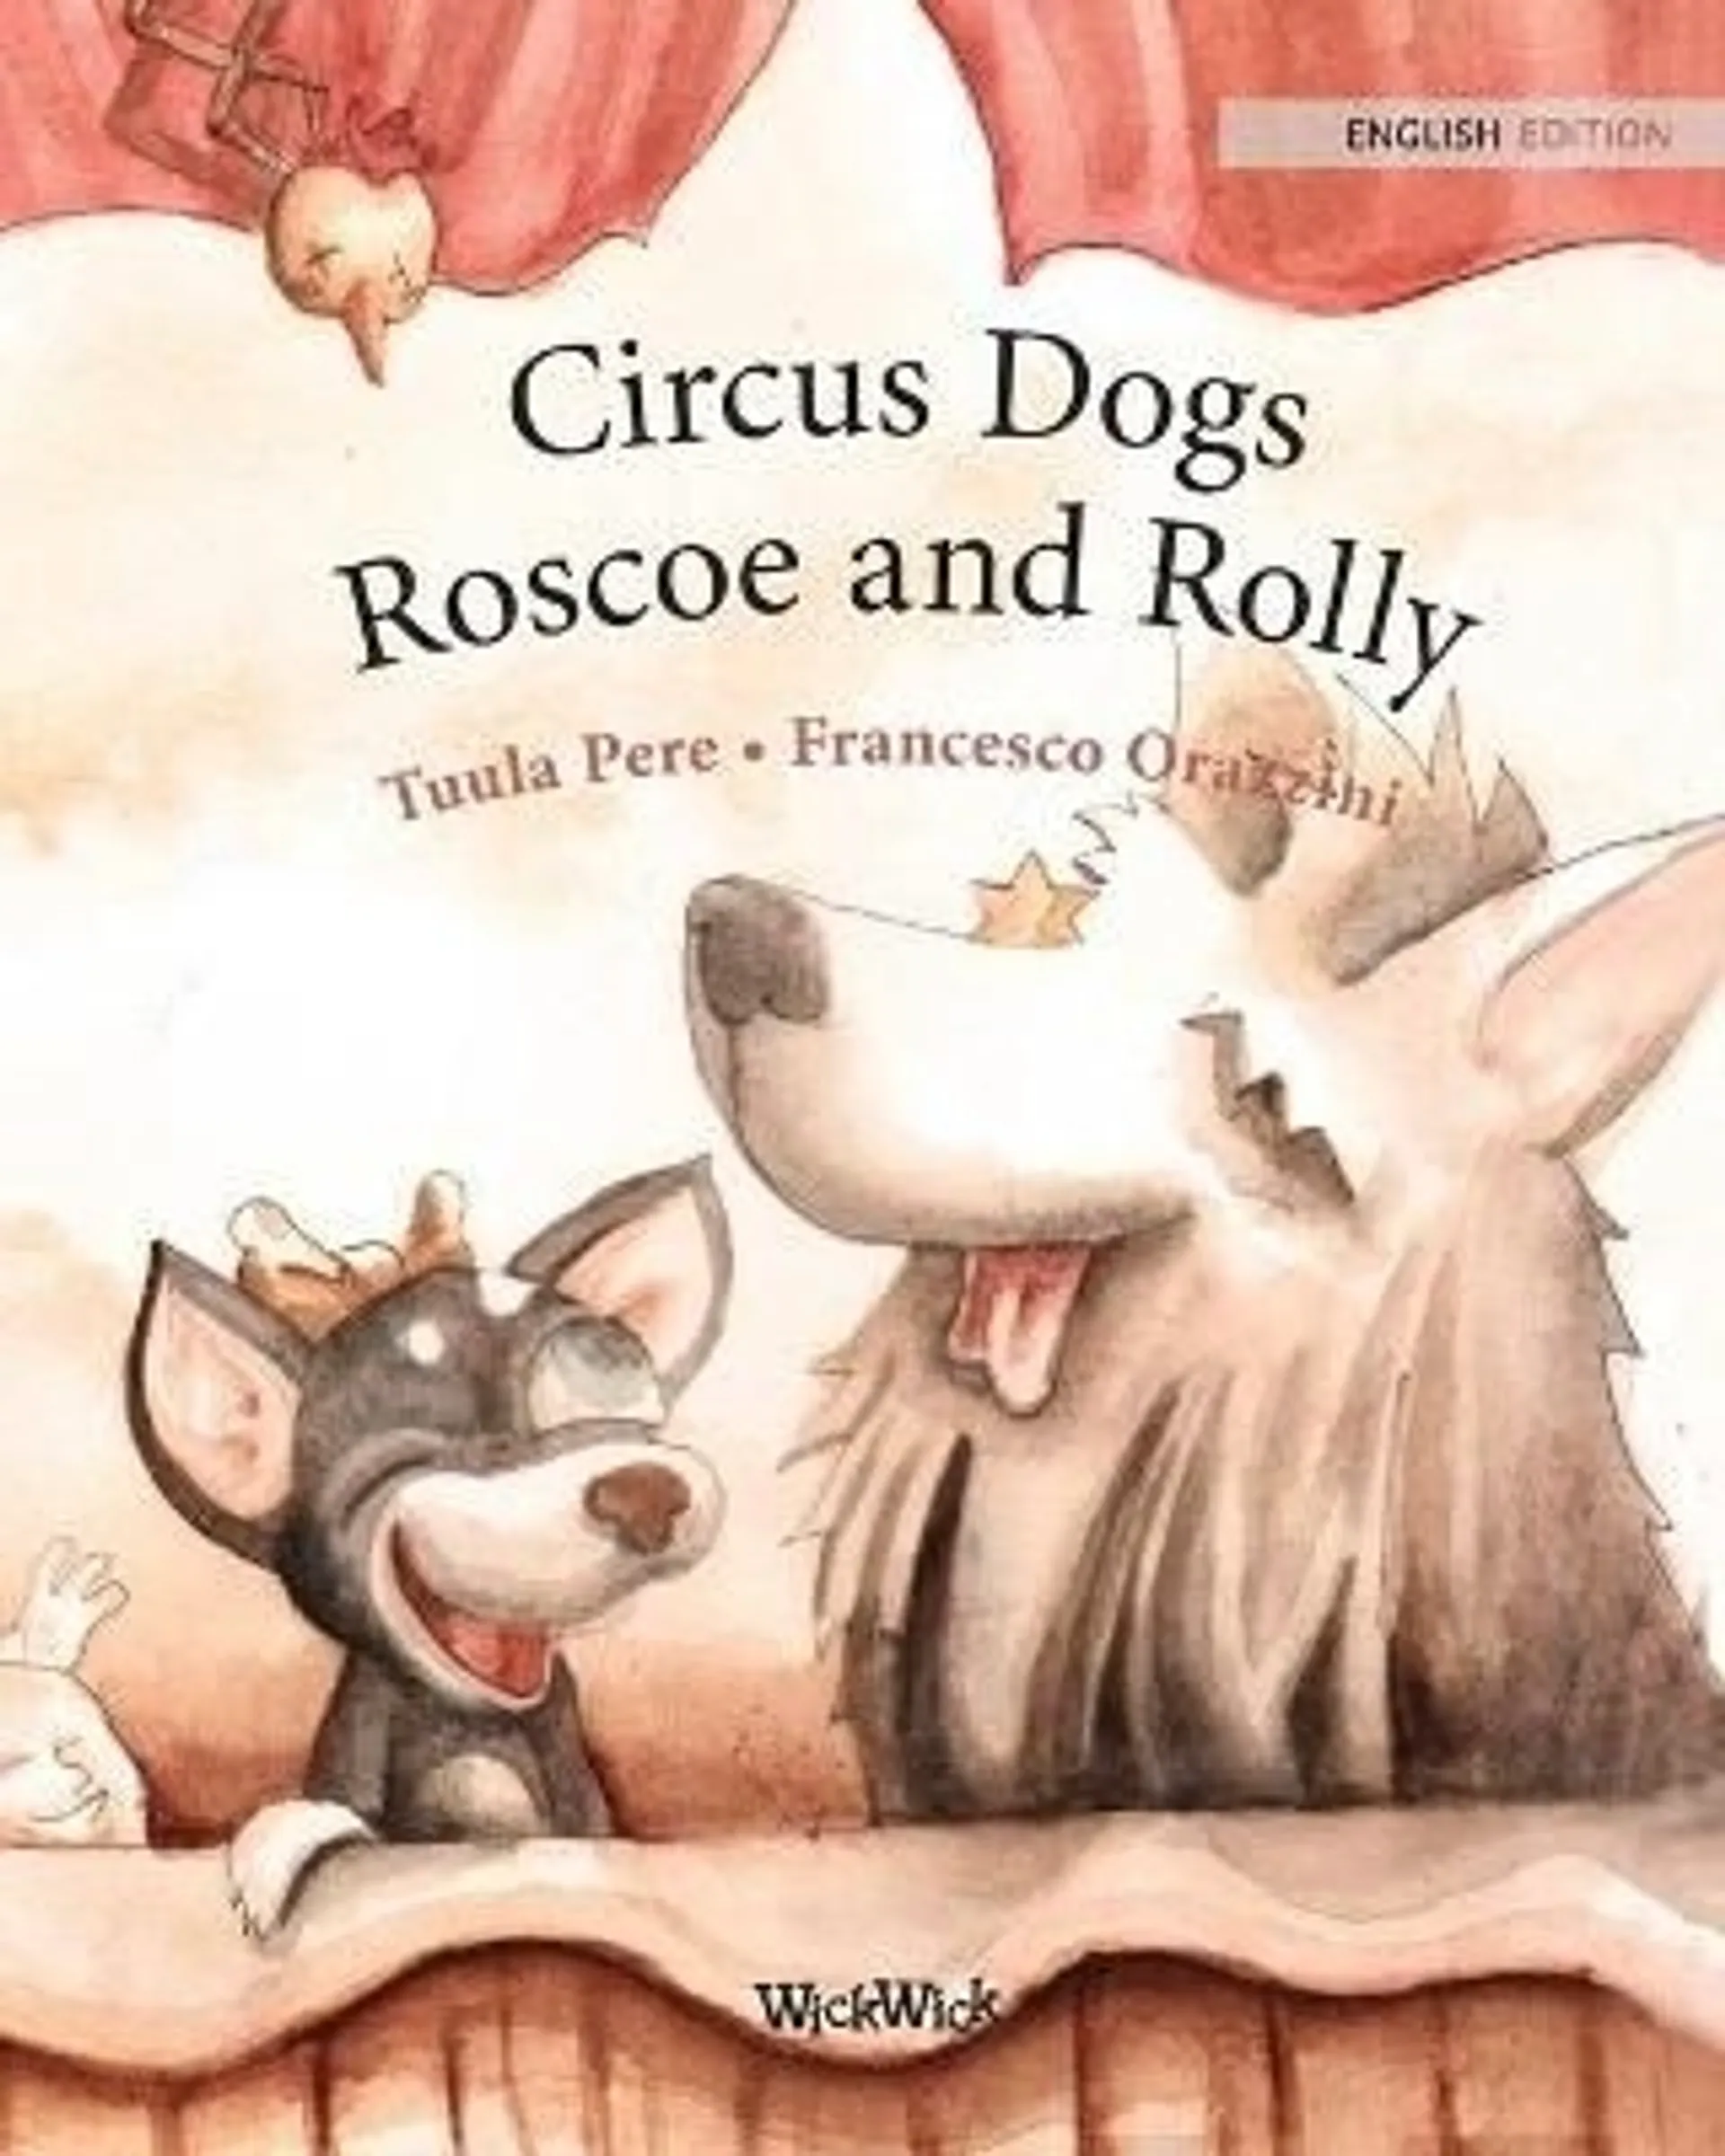 Pere, Circus Dogs Roscoe and Rolly